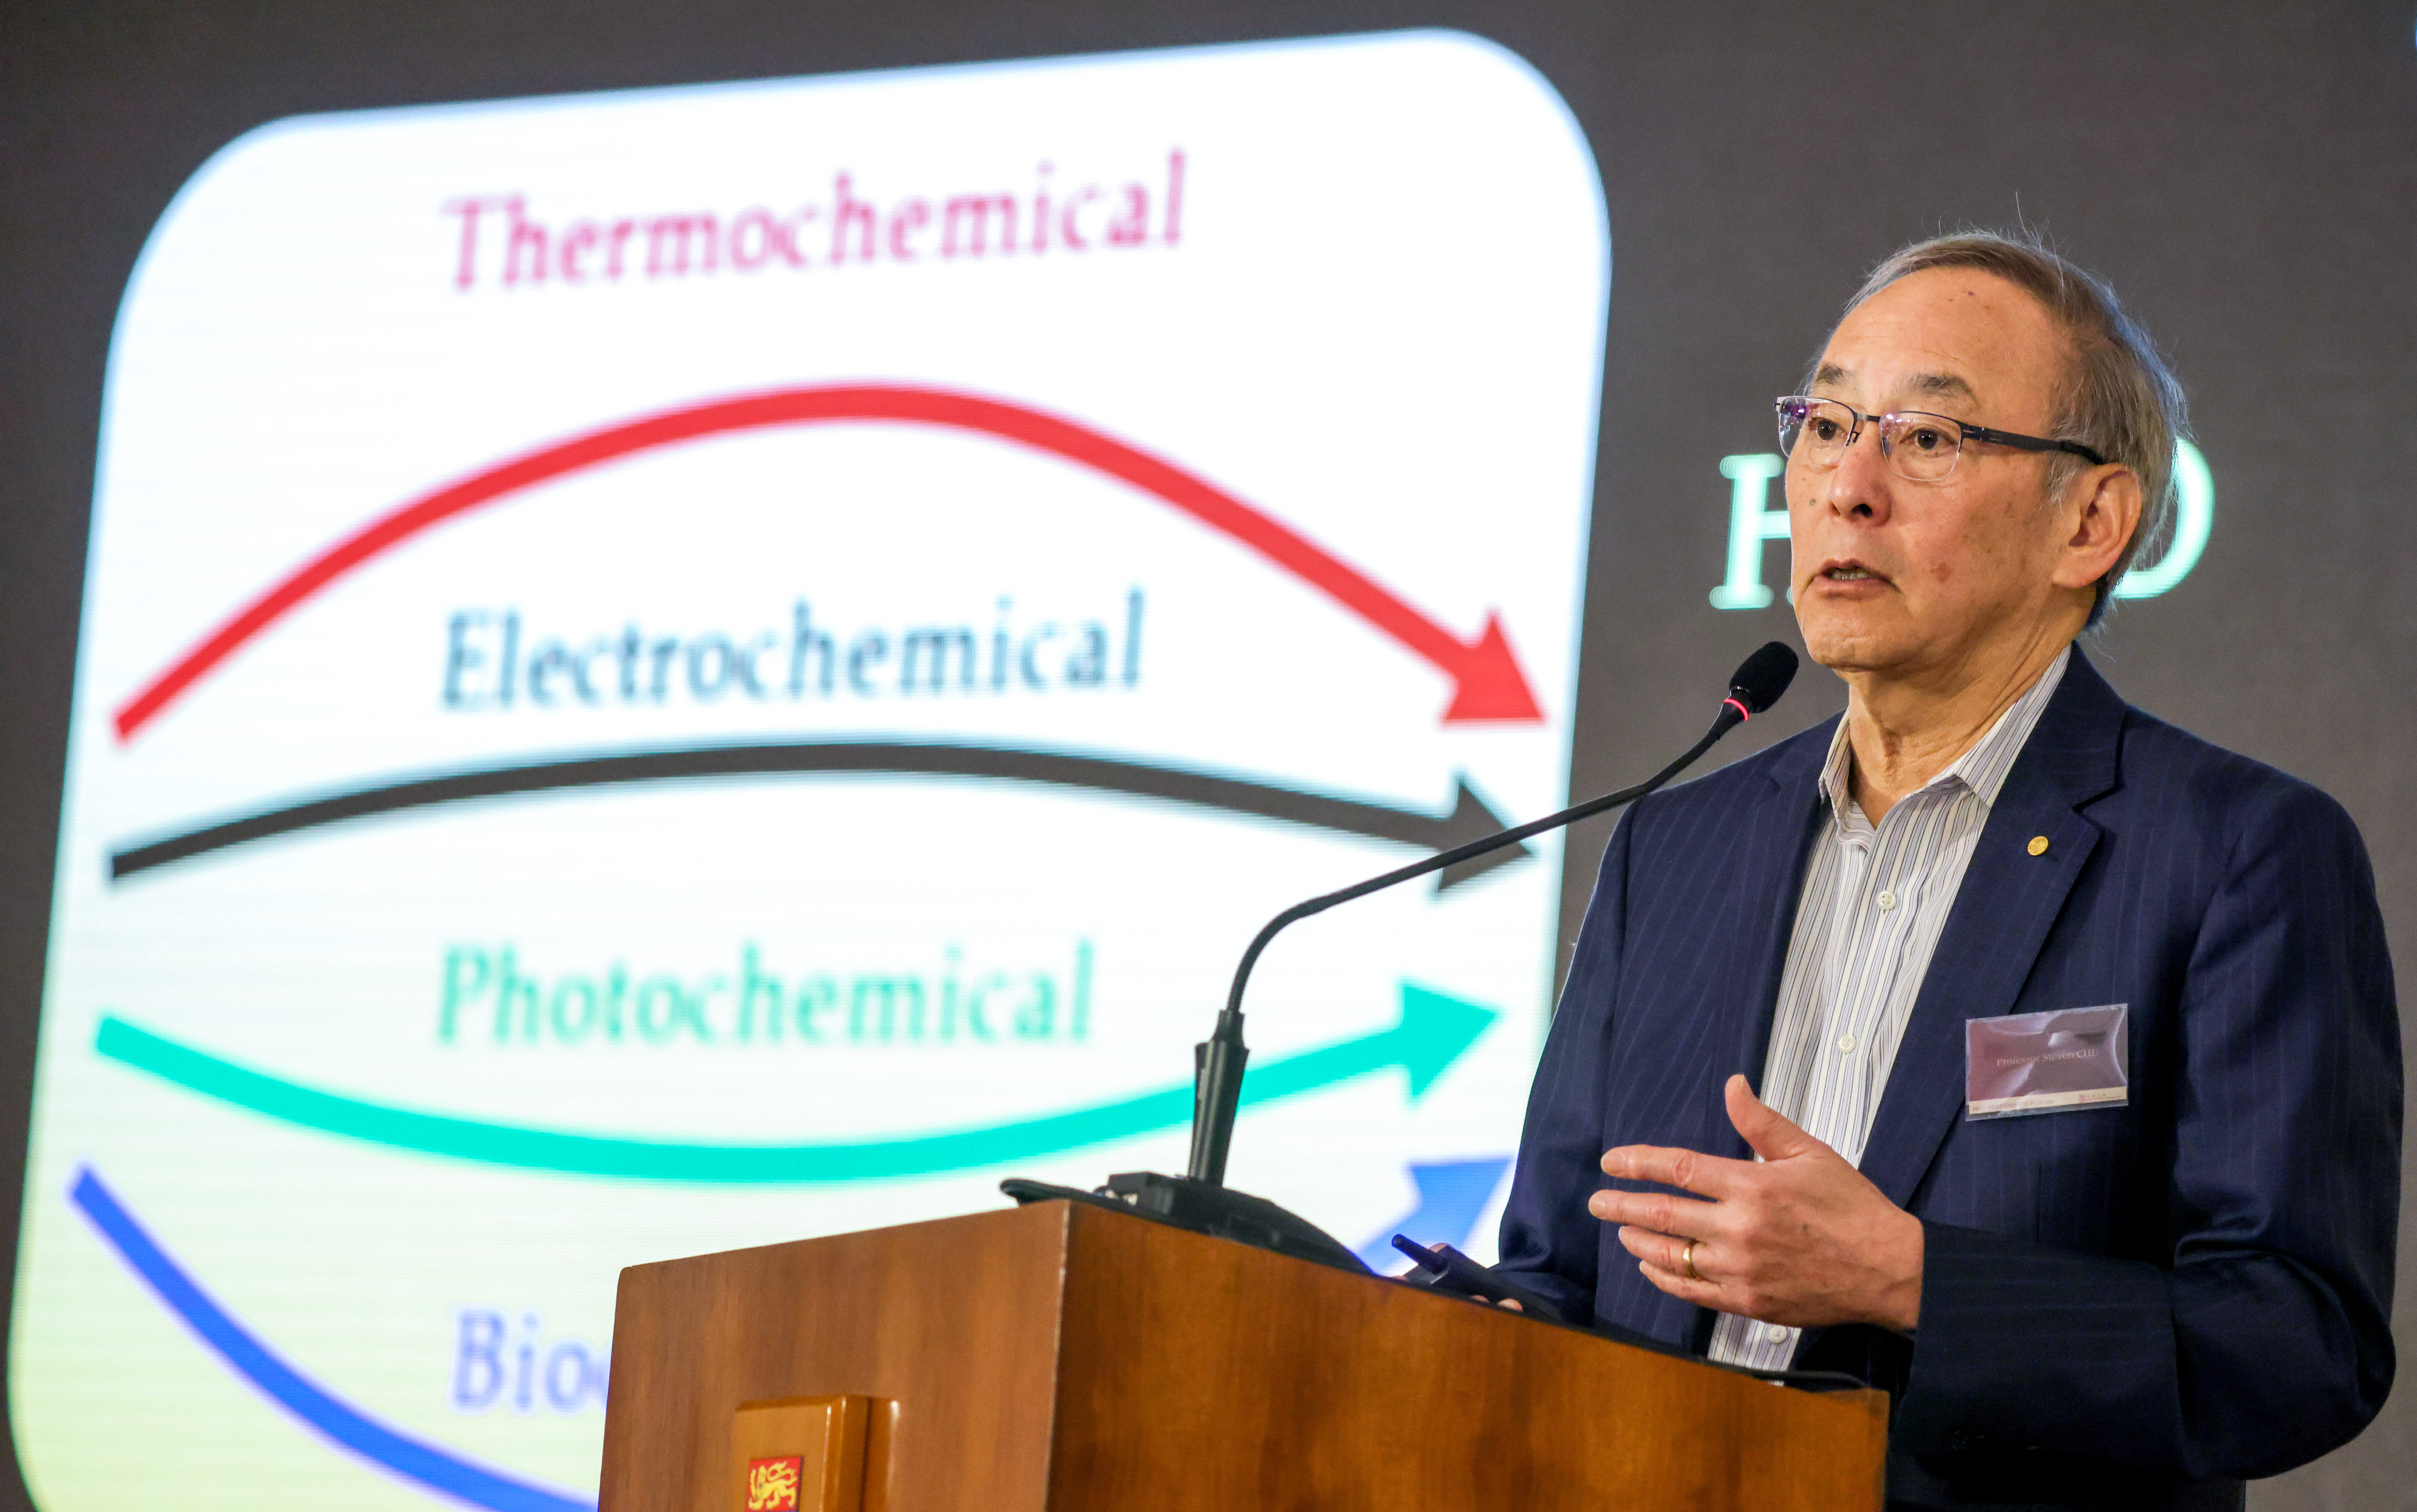 Global warming: renewable energy needs to be twice as cheap as fossil fuels, Nobel laureate Steven Chu tells HKU forum